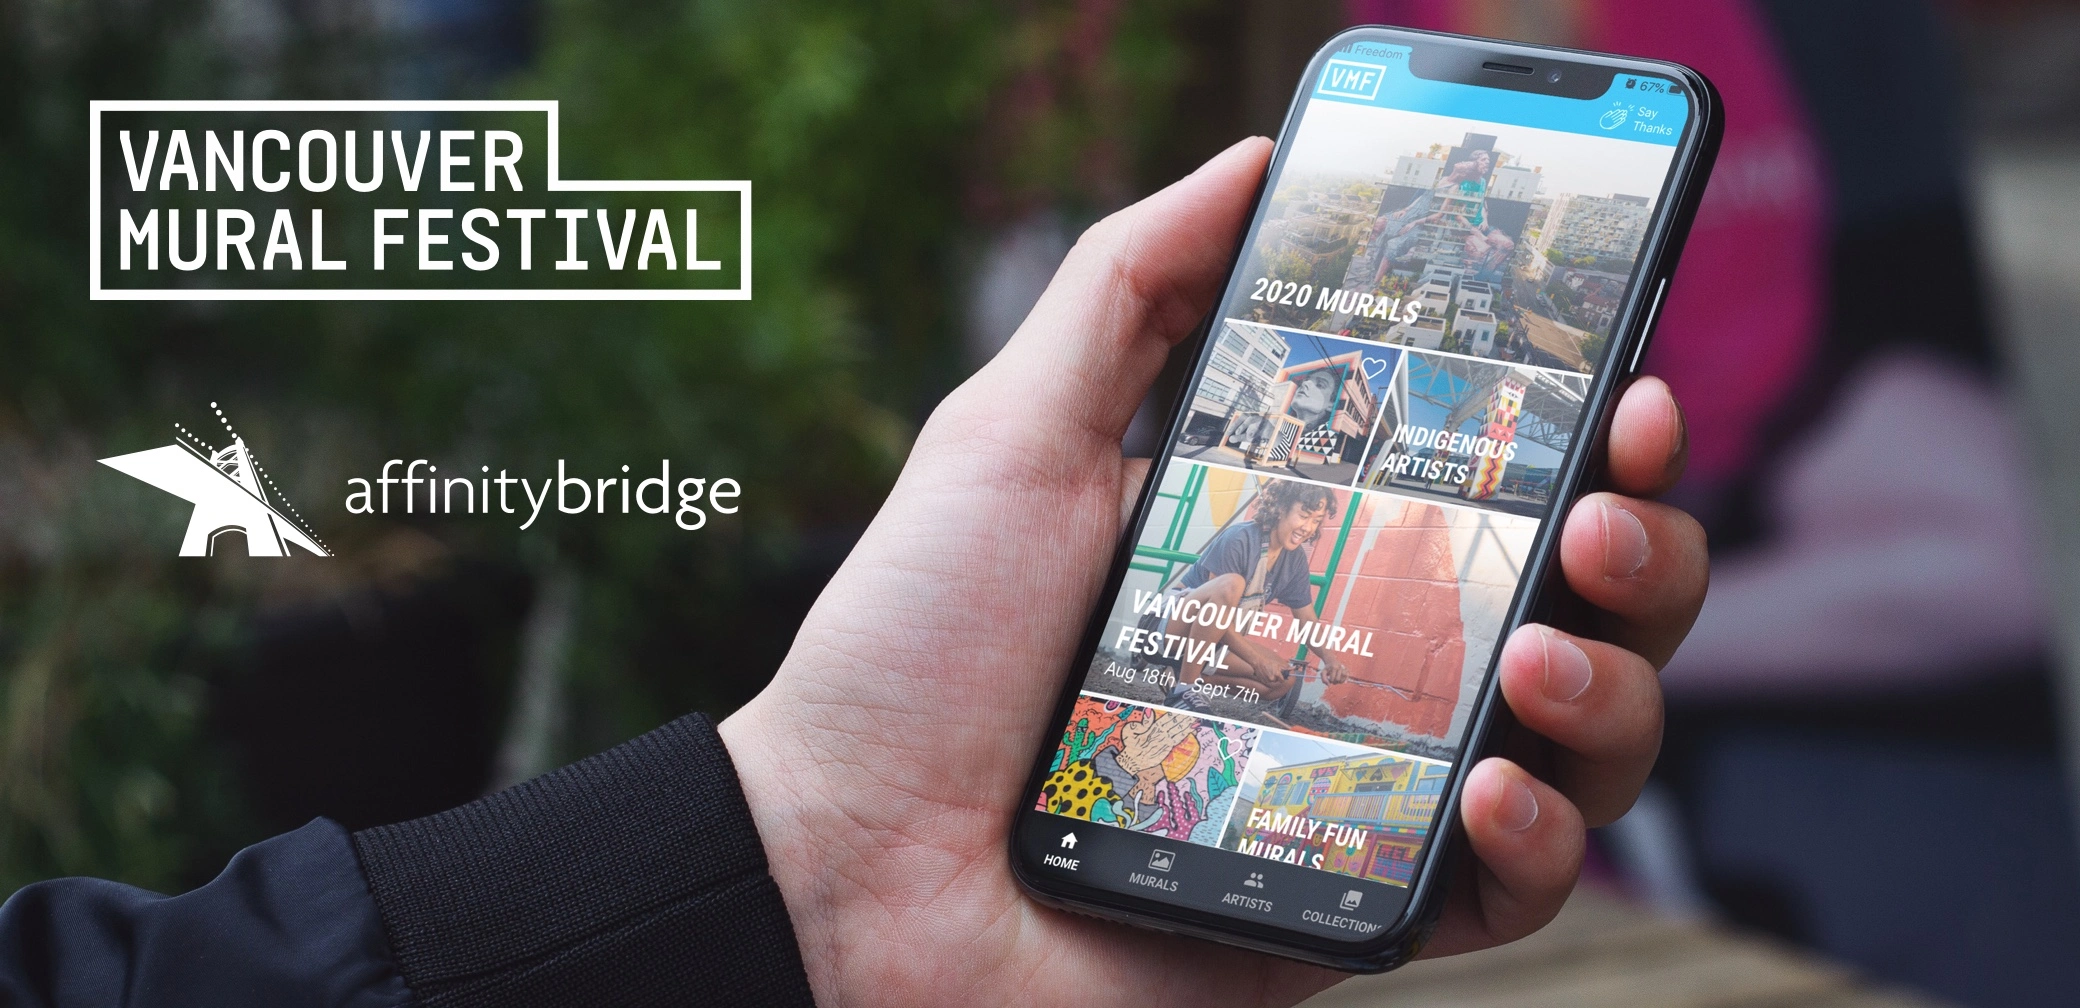 a mobile device with the Mural Fest app is shown in someone's hand